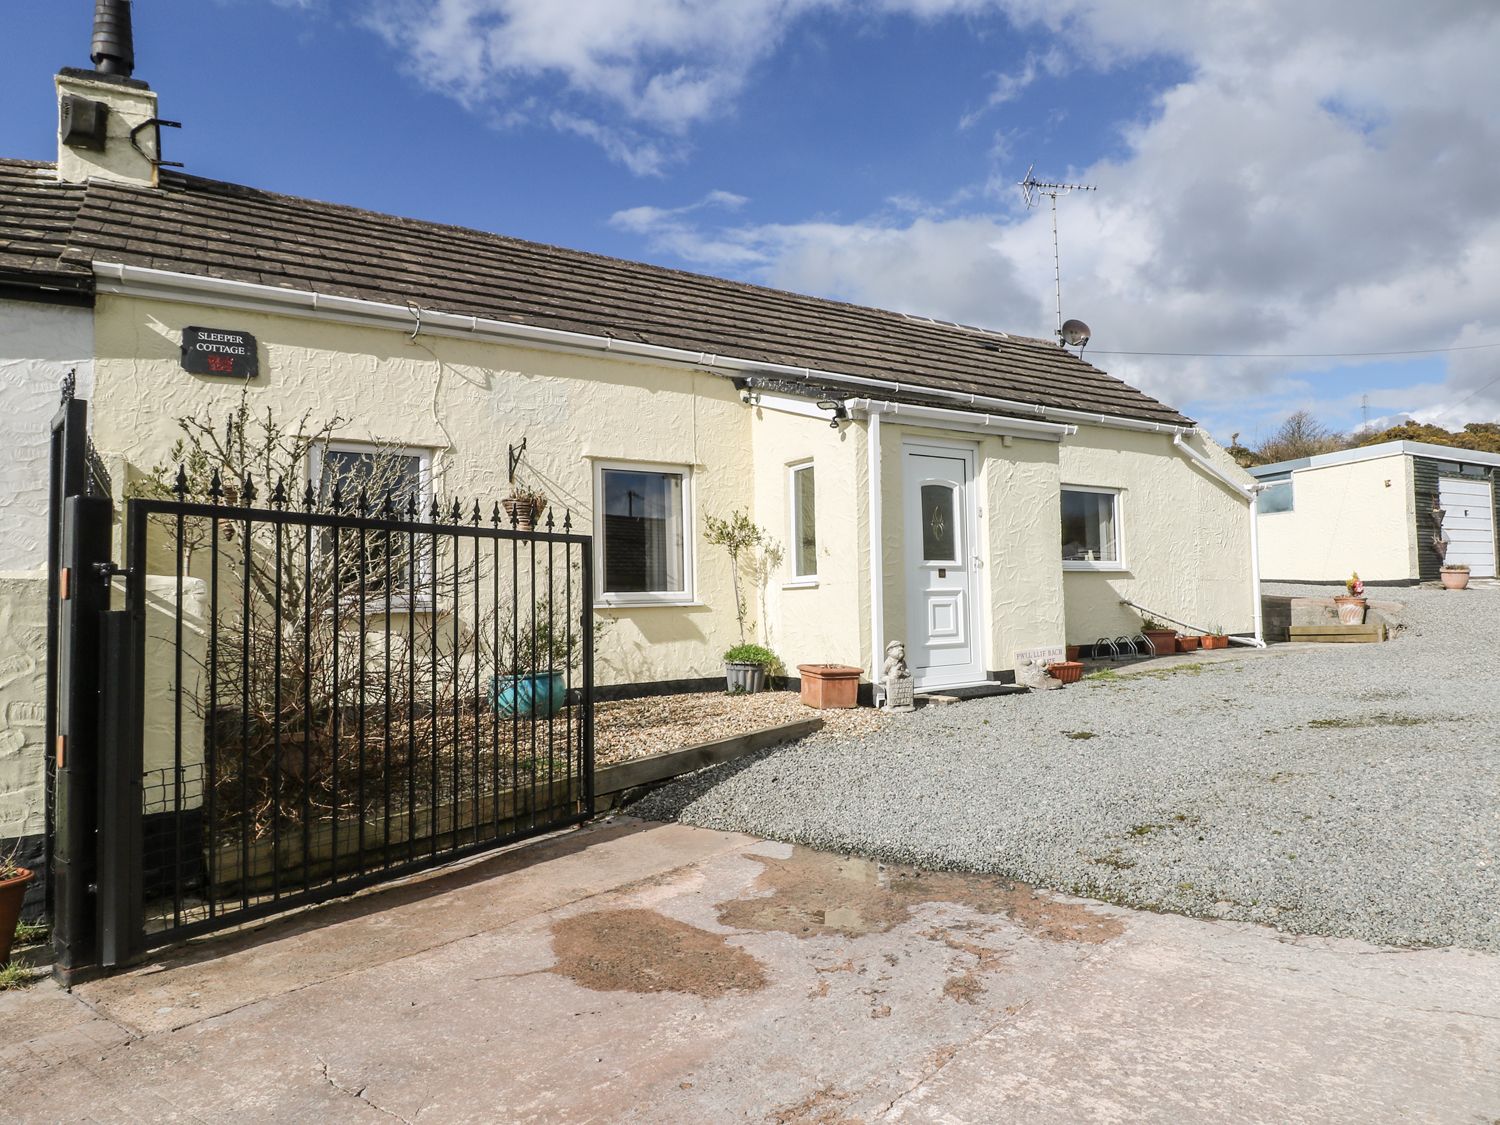 Sleeper Cottage - Anglesey - 980144 - photo 1